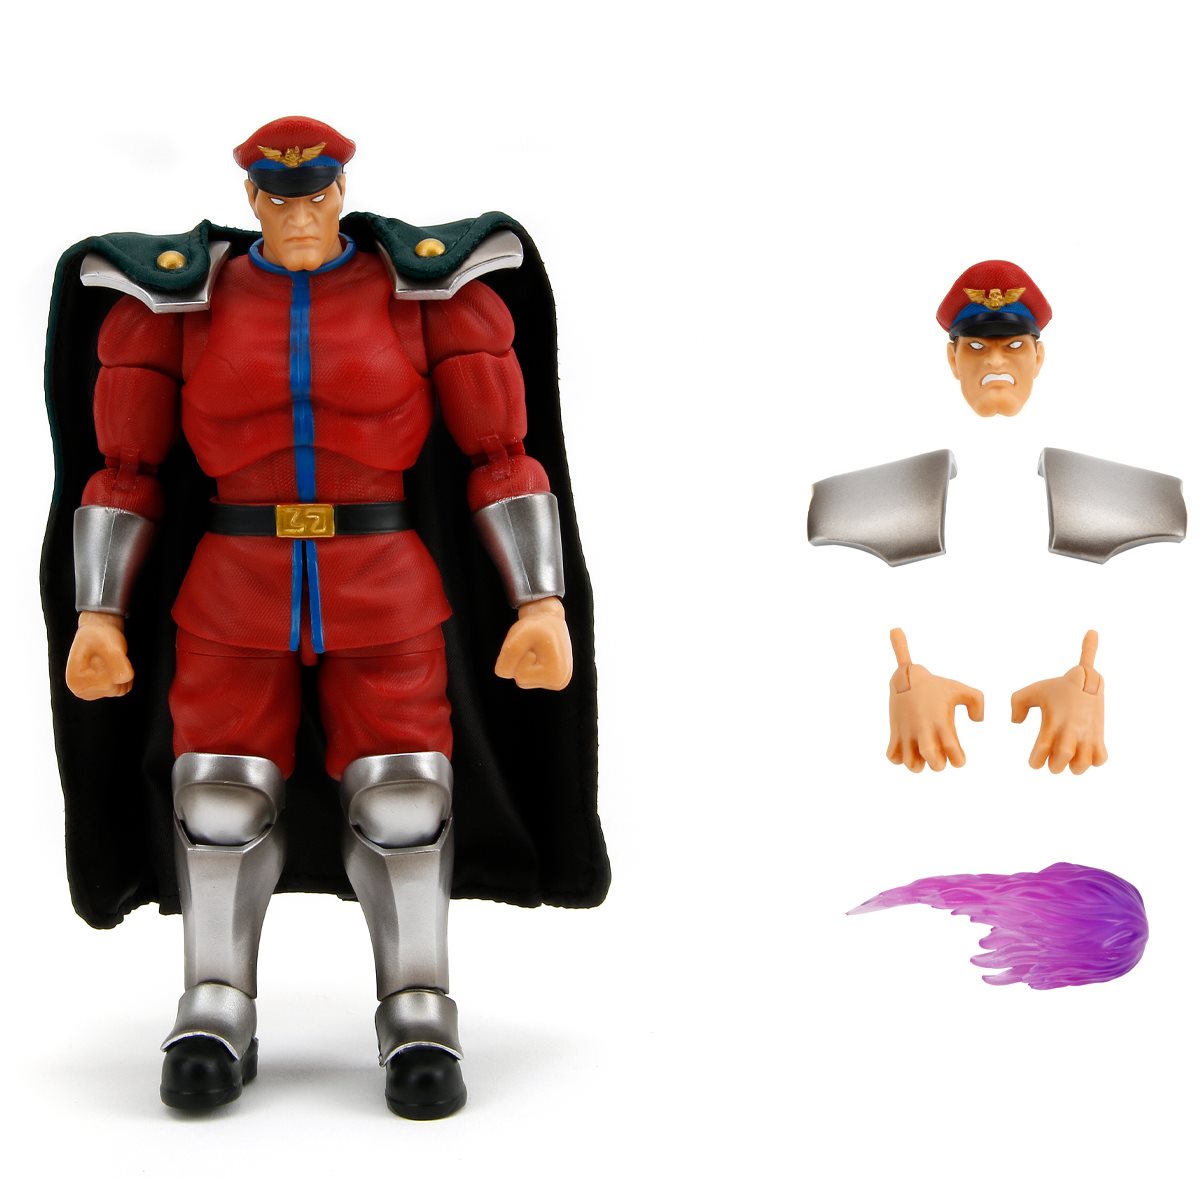 [PREORDER August 2024] Ultra Street Fighter II The Final Challengers M. Bison